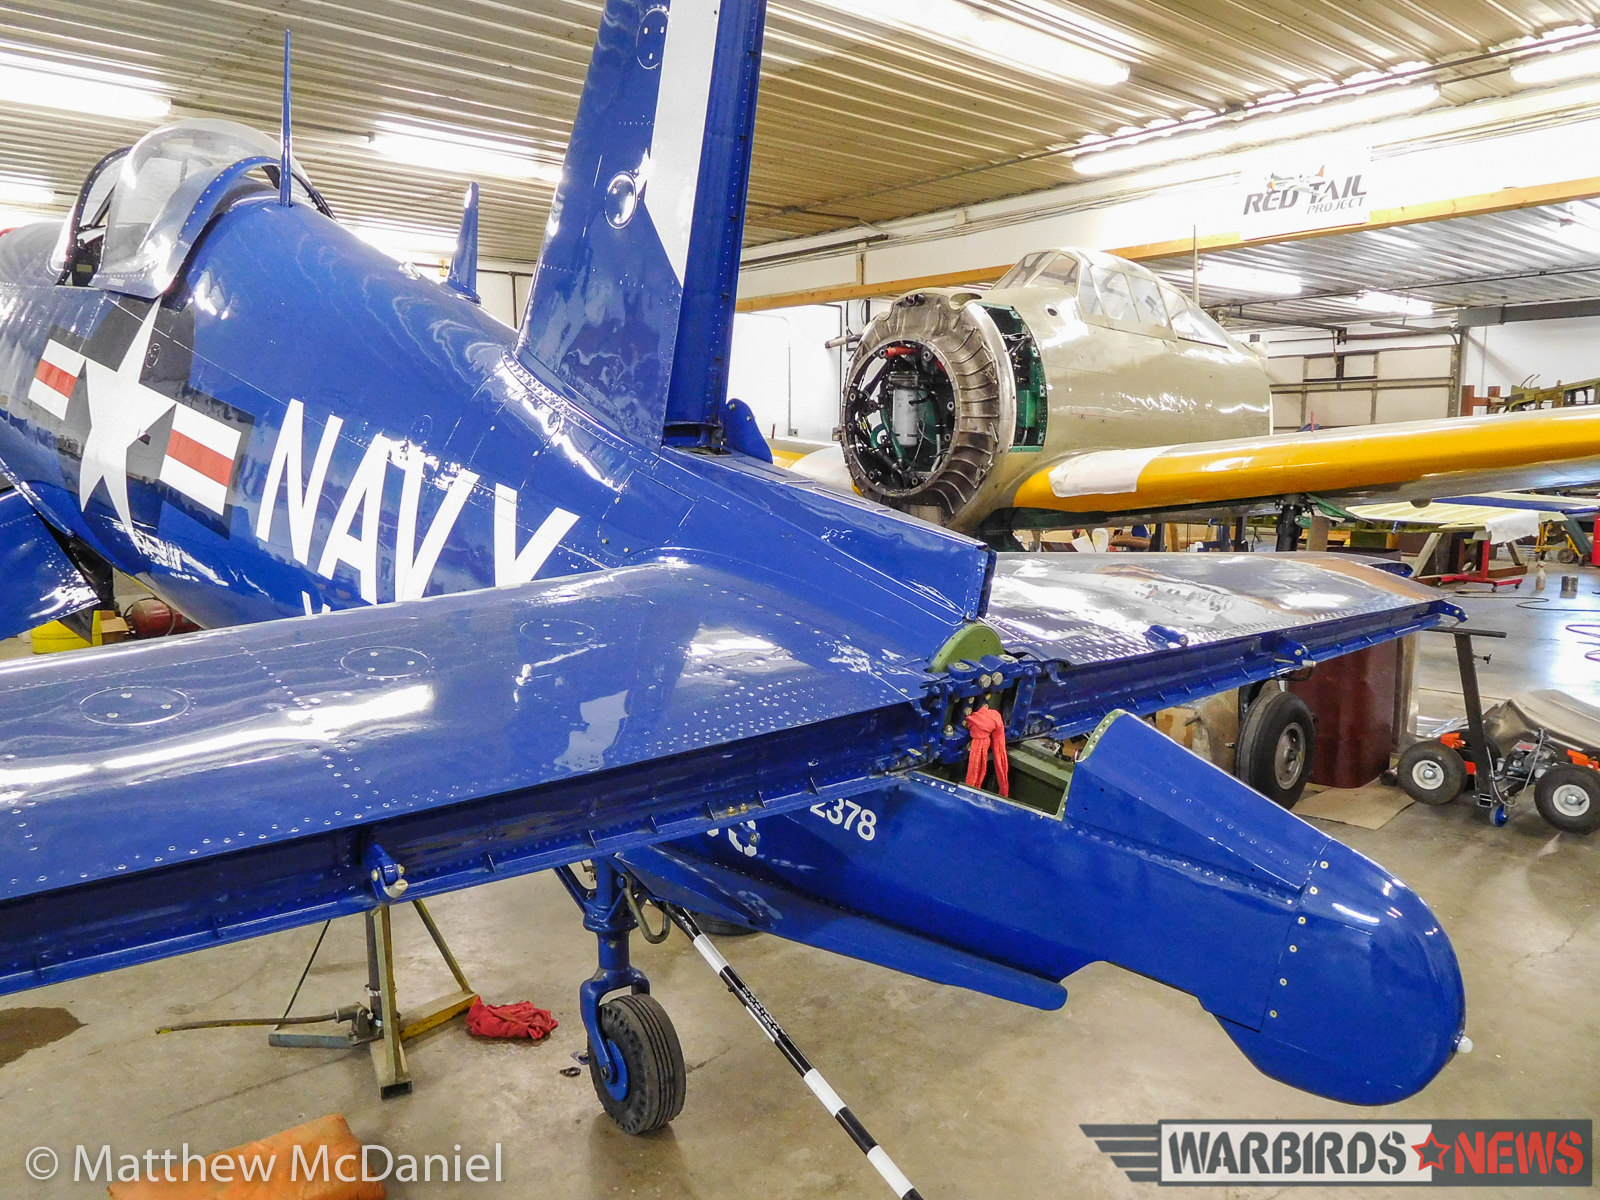 The F4U-4 Corsair and its former Pacific Theater foe, the A6M2 Zero, share close quarters inside the Tri-State aviation main hangar-shop, both entering the final stages of their repair programs back to airworthy status. (photo by Matthew McDaniel)